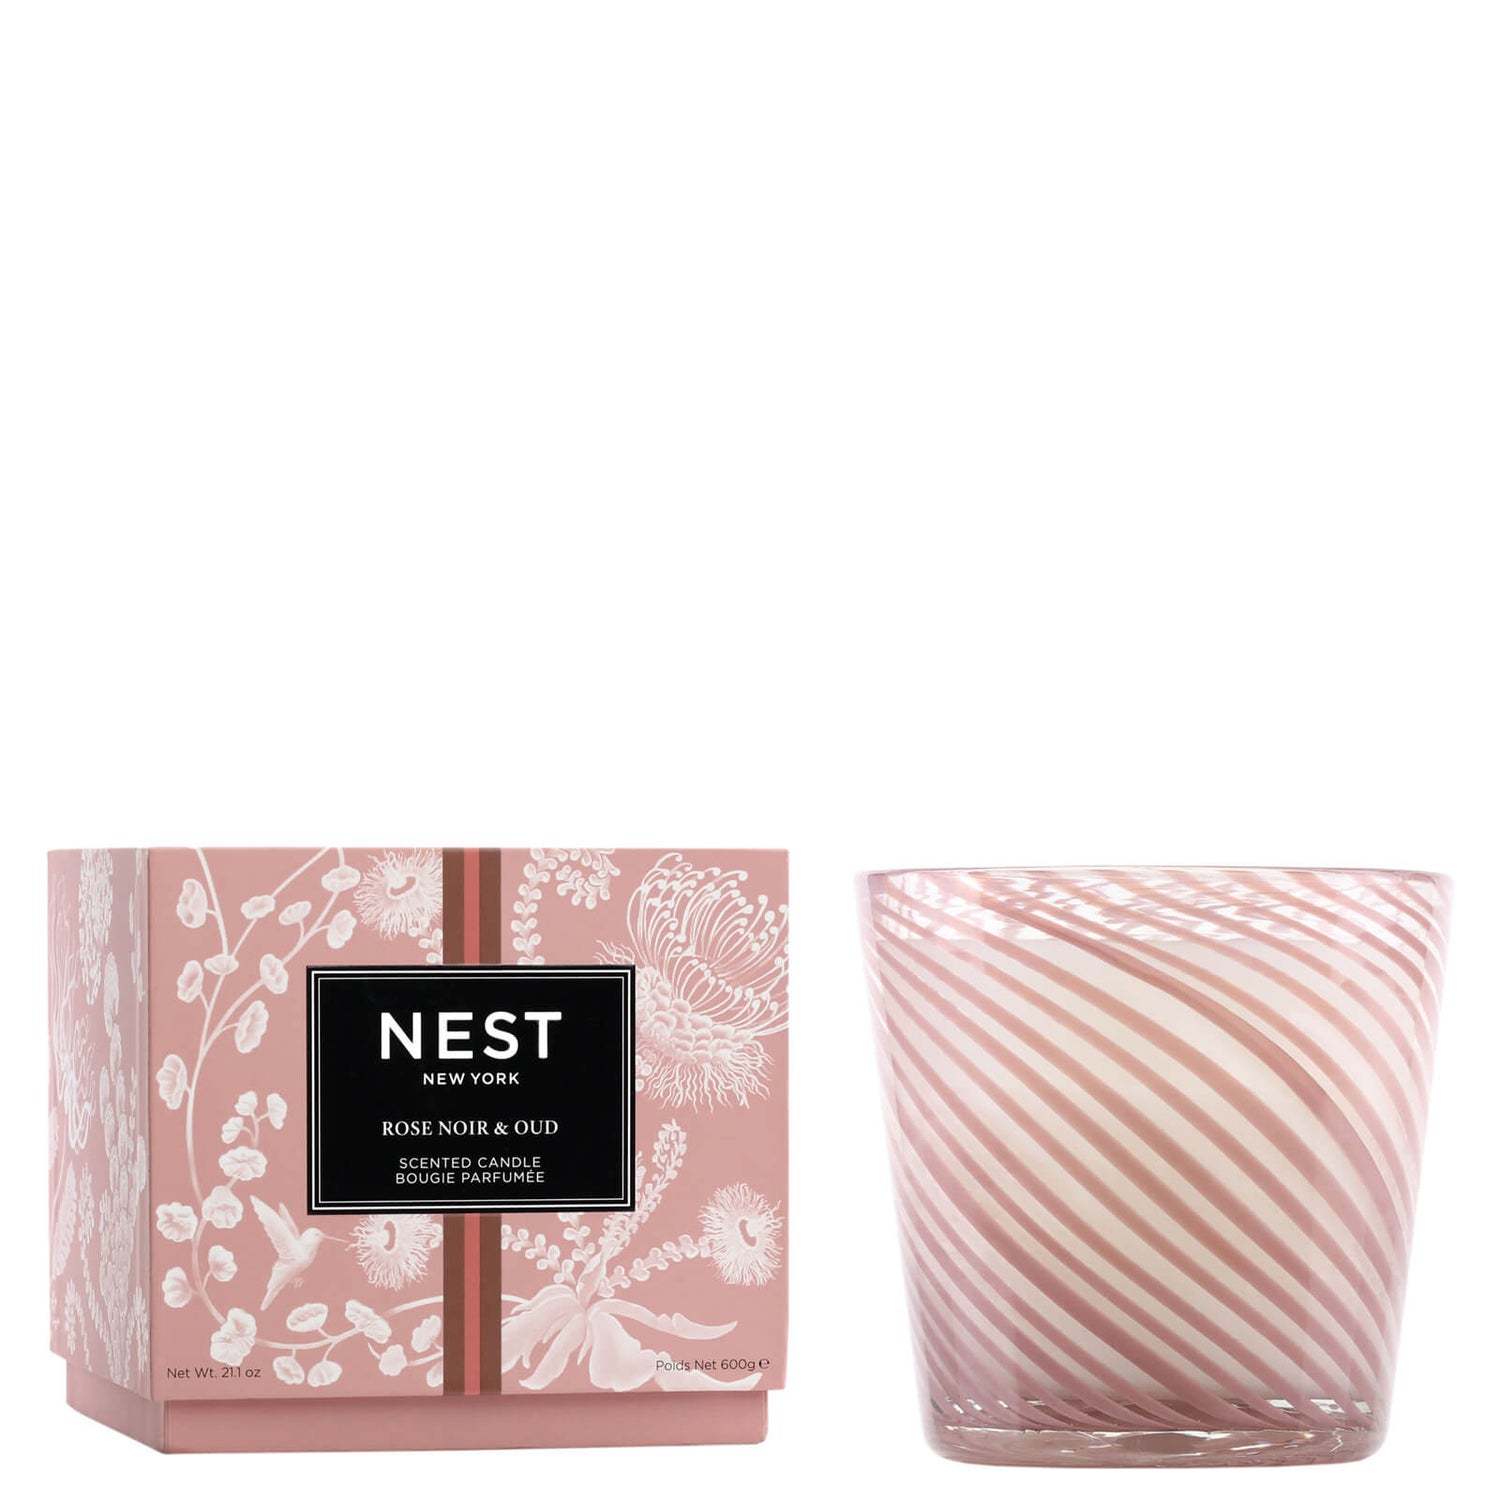 NEST Fragrances Rose Noir and Oud Specialty 3-Wick Candle 600g